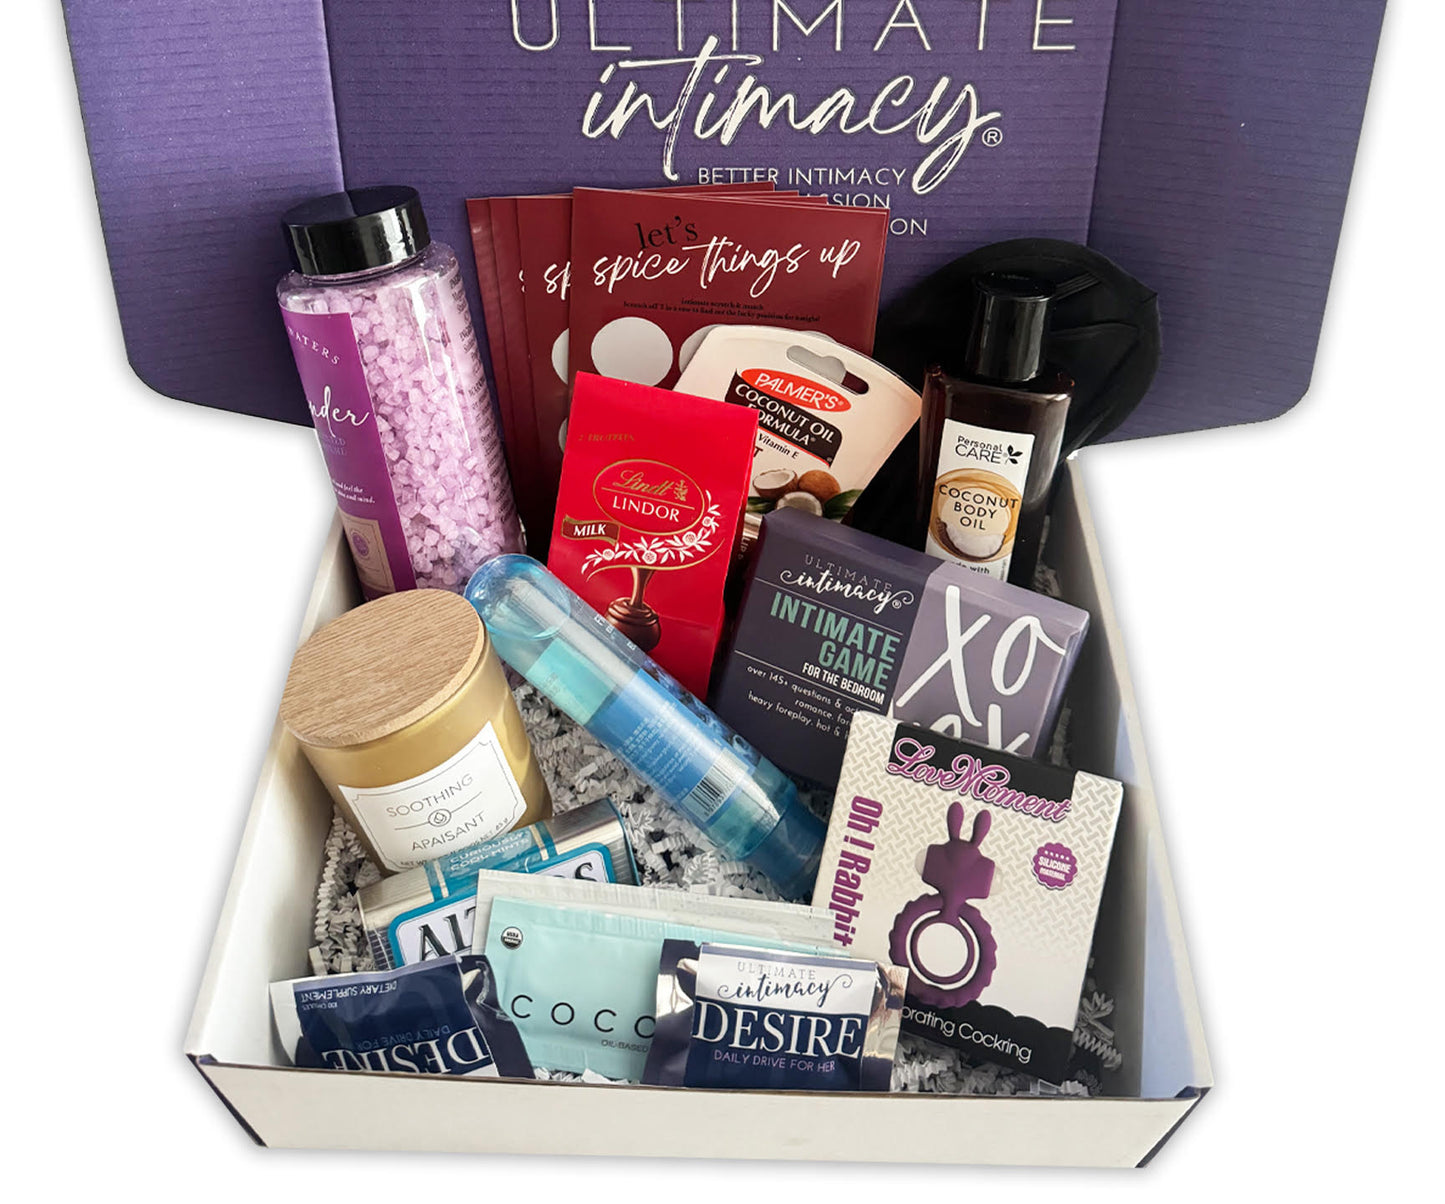 The Ultimate Intimacy Box